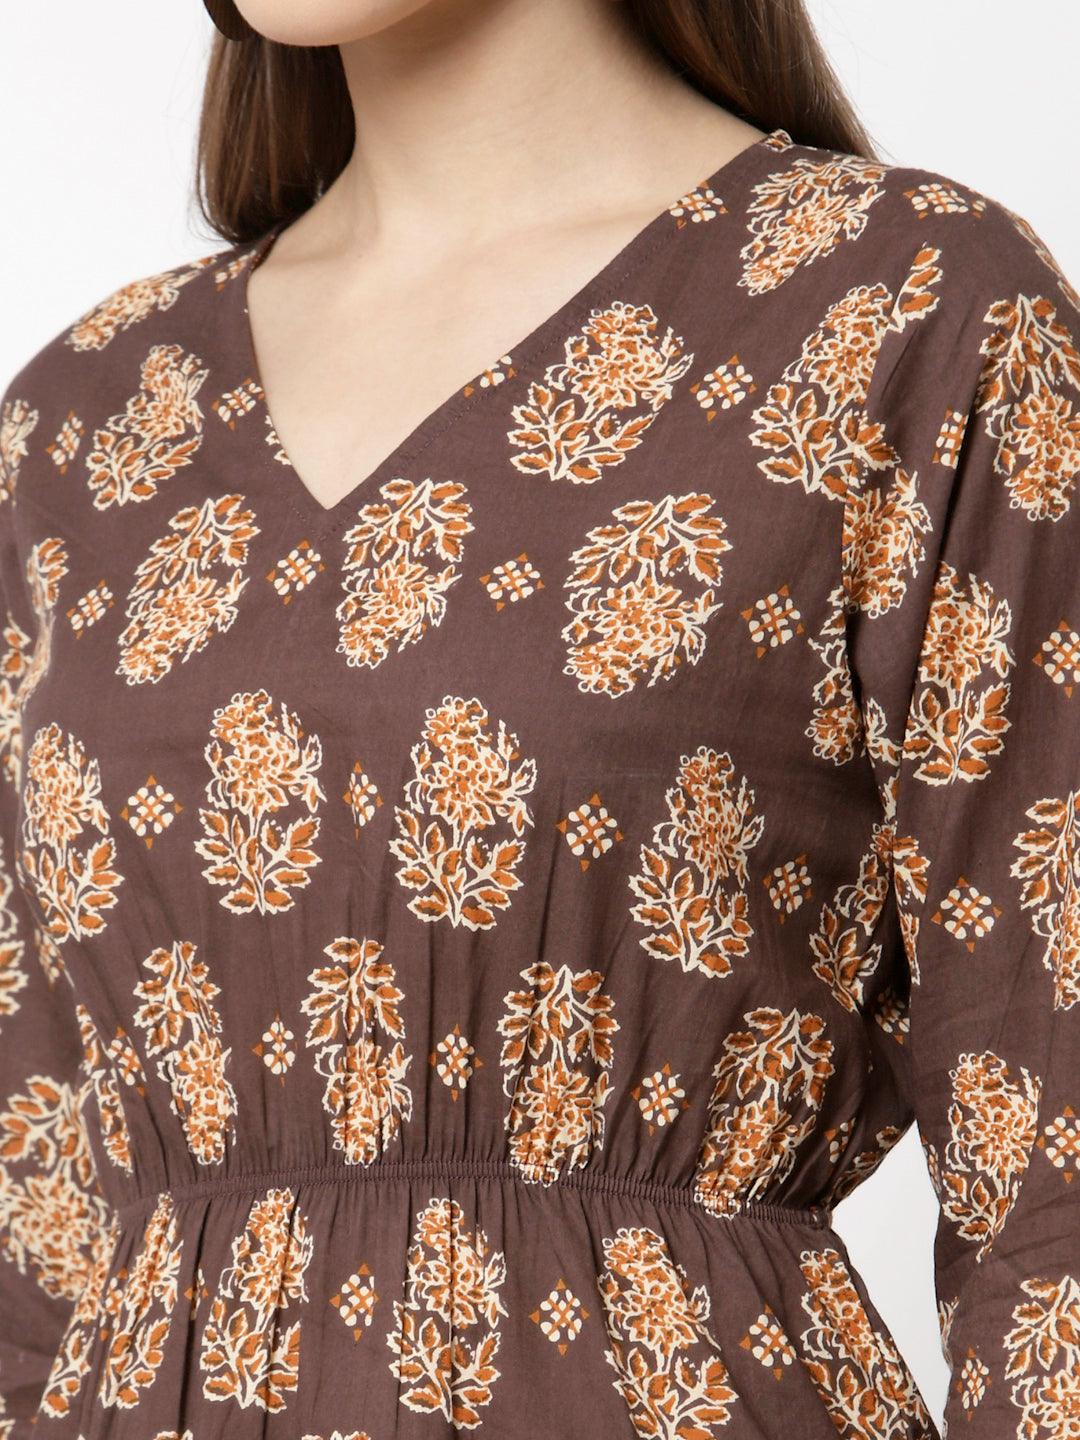 Women Brown Printed Cotton Top by Myshka (1 Pc Set) - Indiakreations